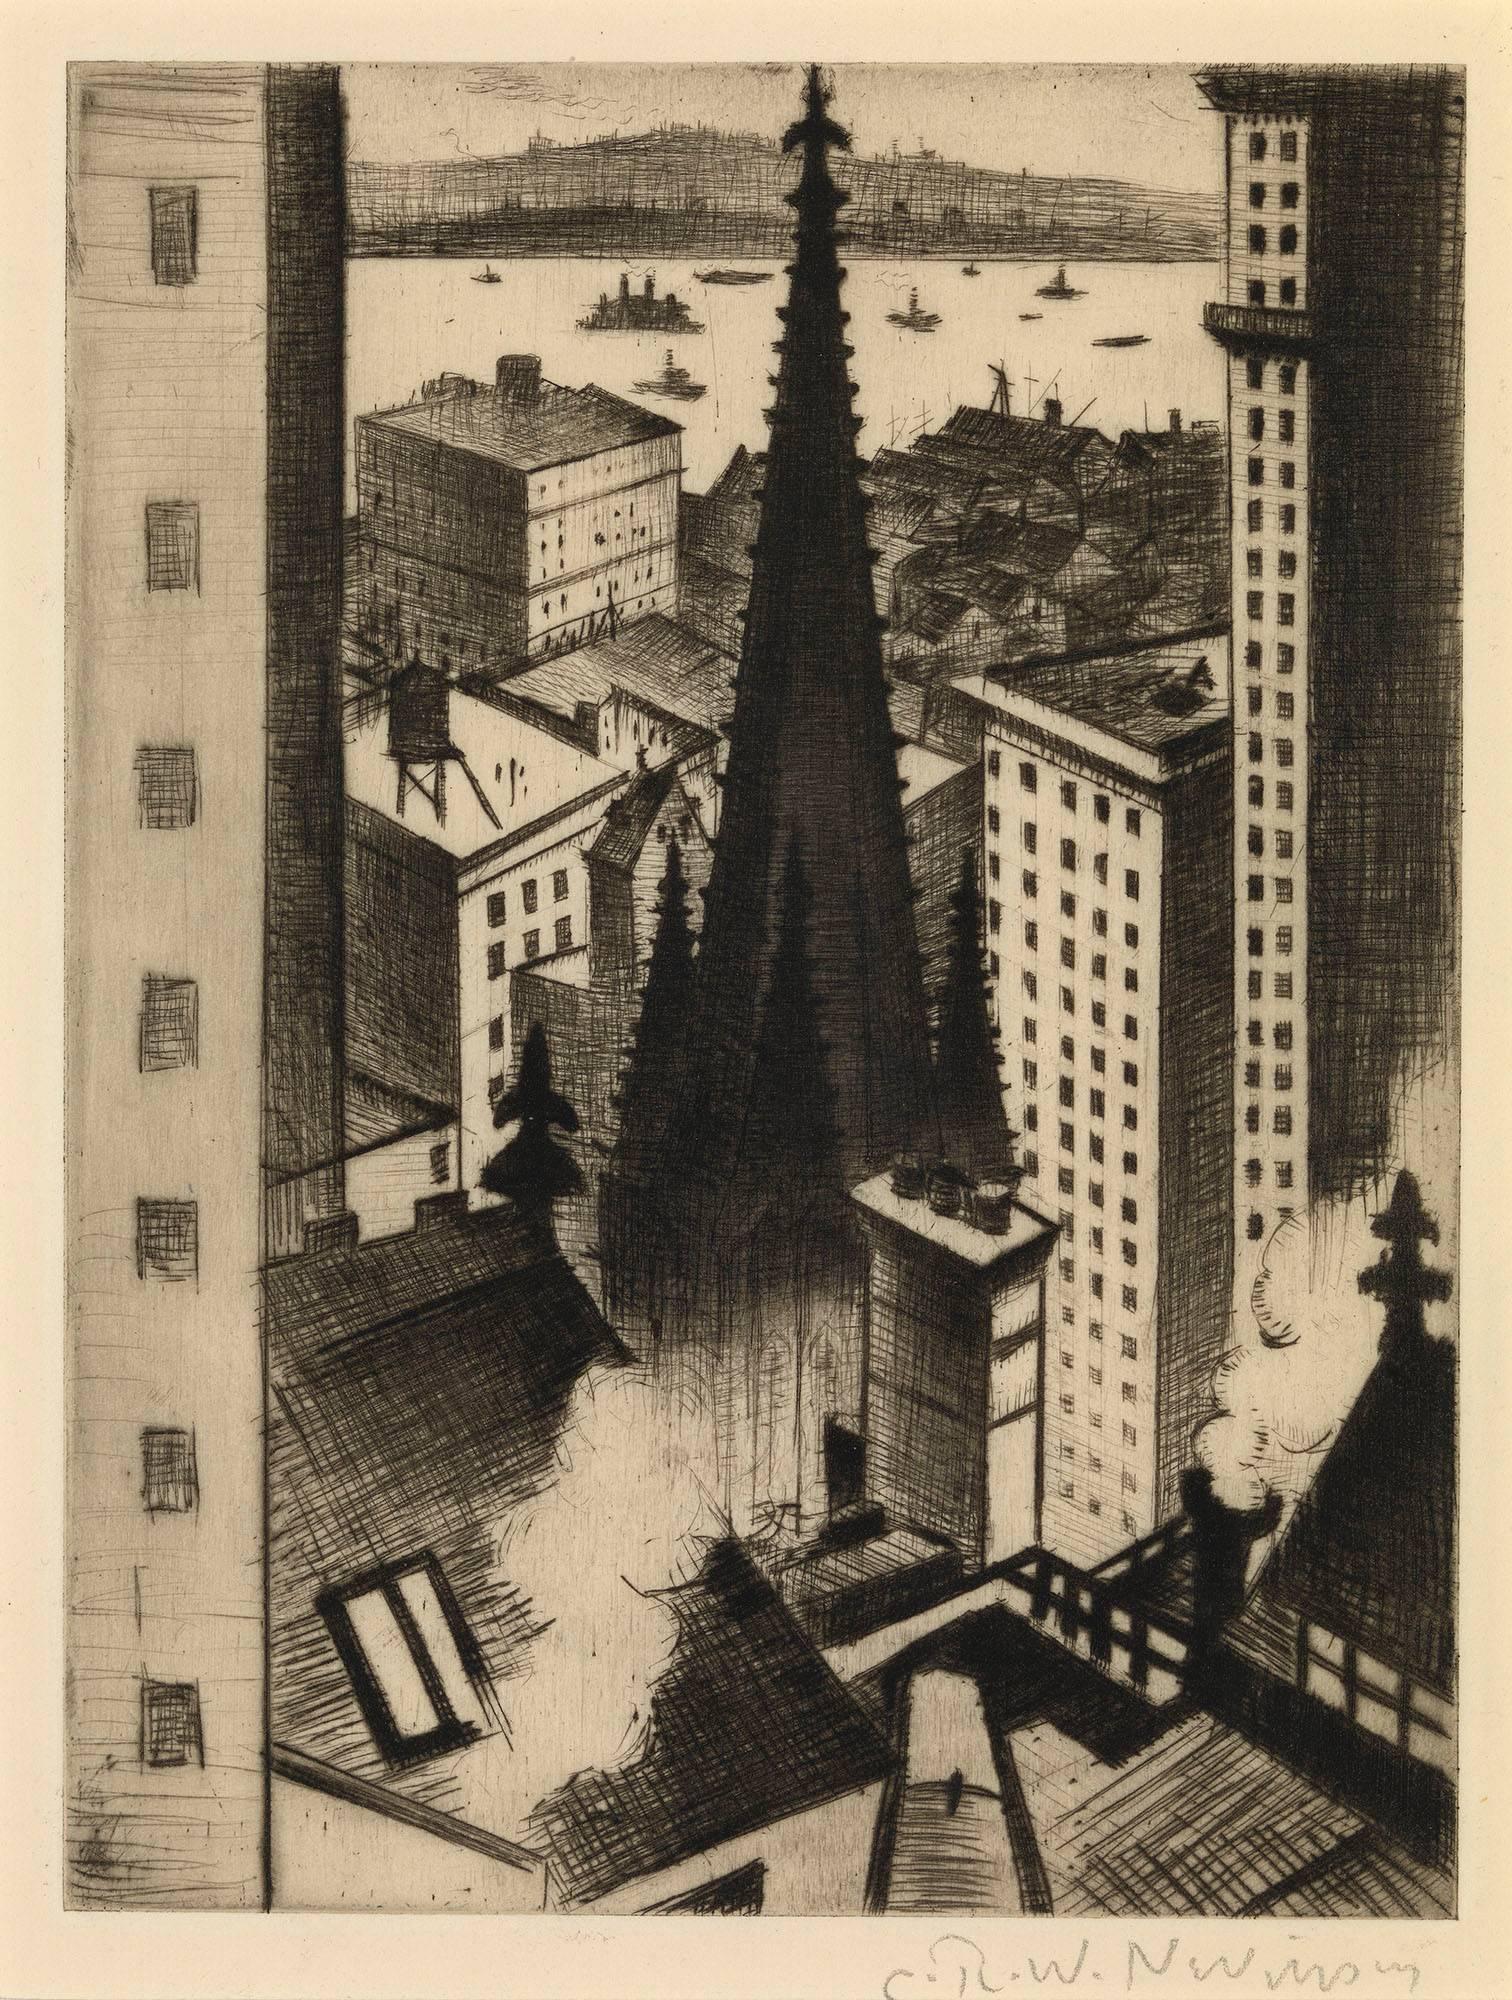 The Temples of New York - Print by Christopher R. W. Nevinson